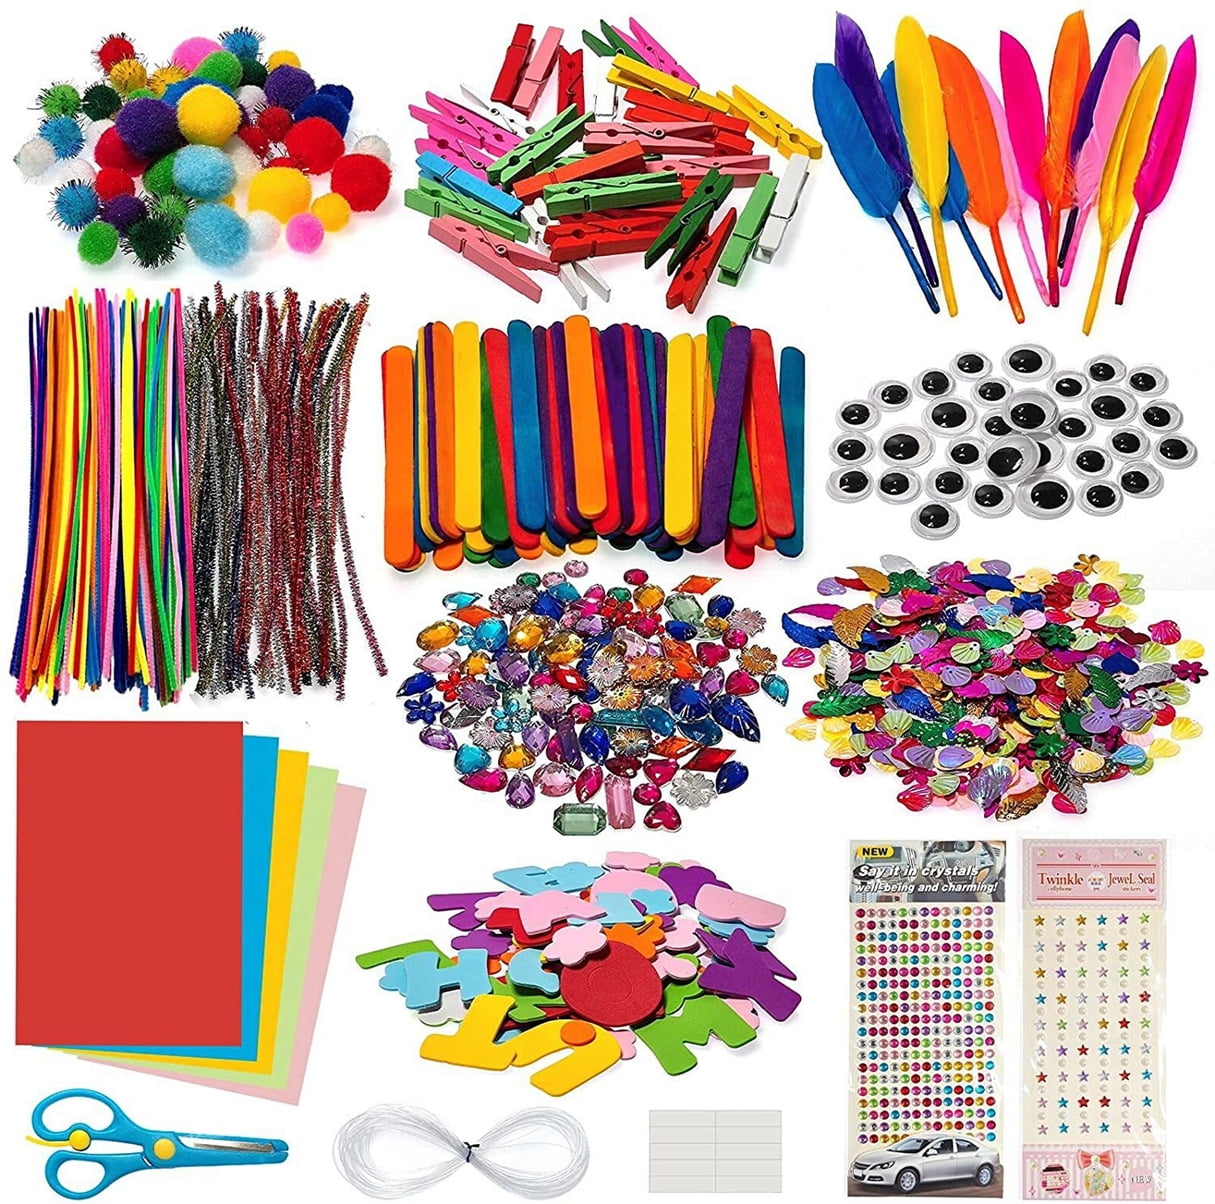 Epiqueone 1090 Piece Kids Art Craft Supplies Assortment Set for School Projects, DIY Activities & Parties; Pipe Cleaners & Chenile, Pom Poms, Googly 